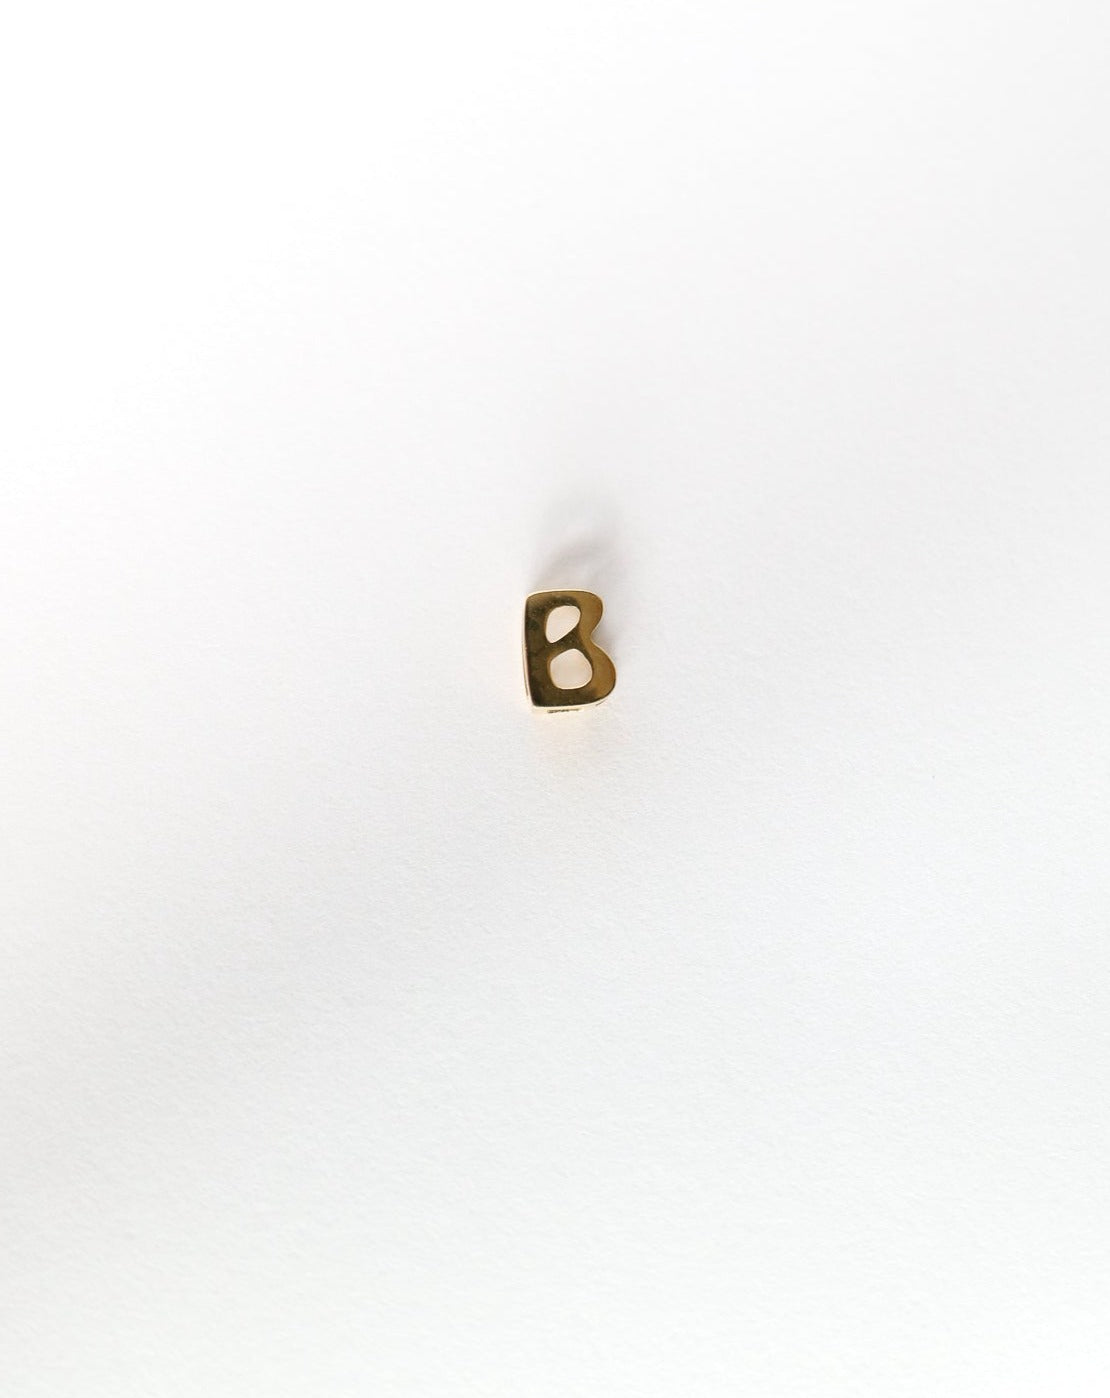 B initial charm letter pendant in 14kt gold